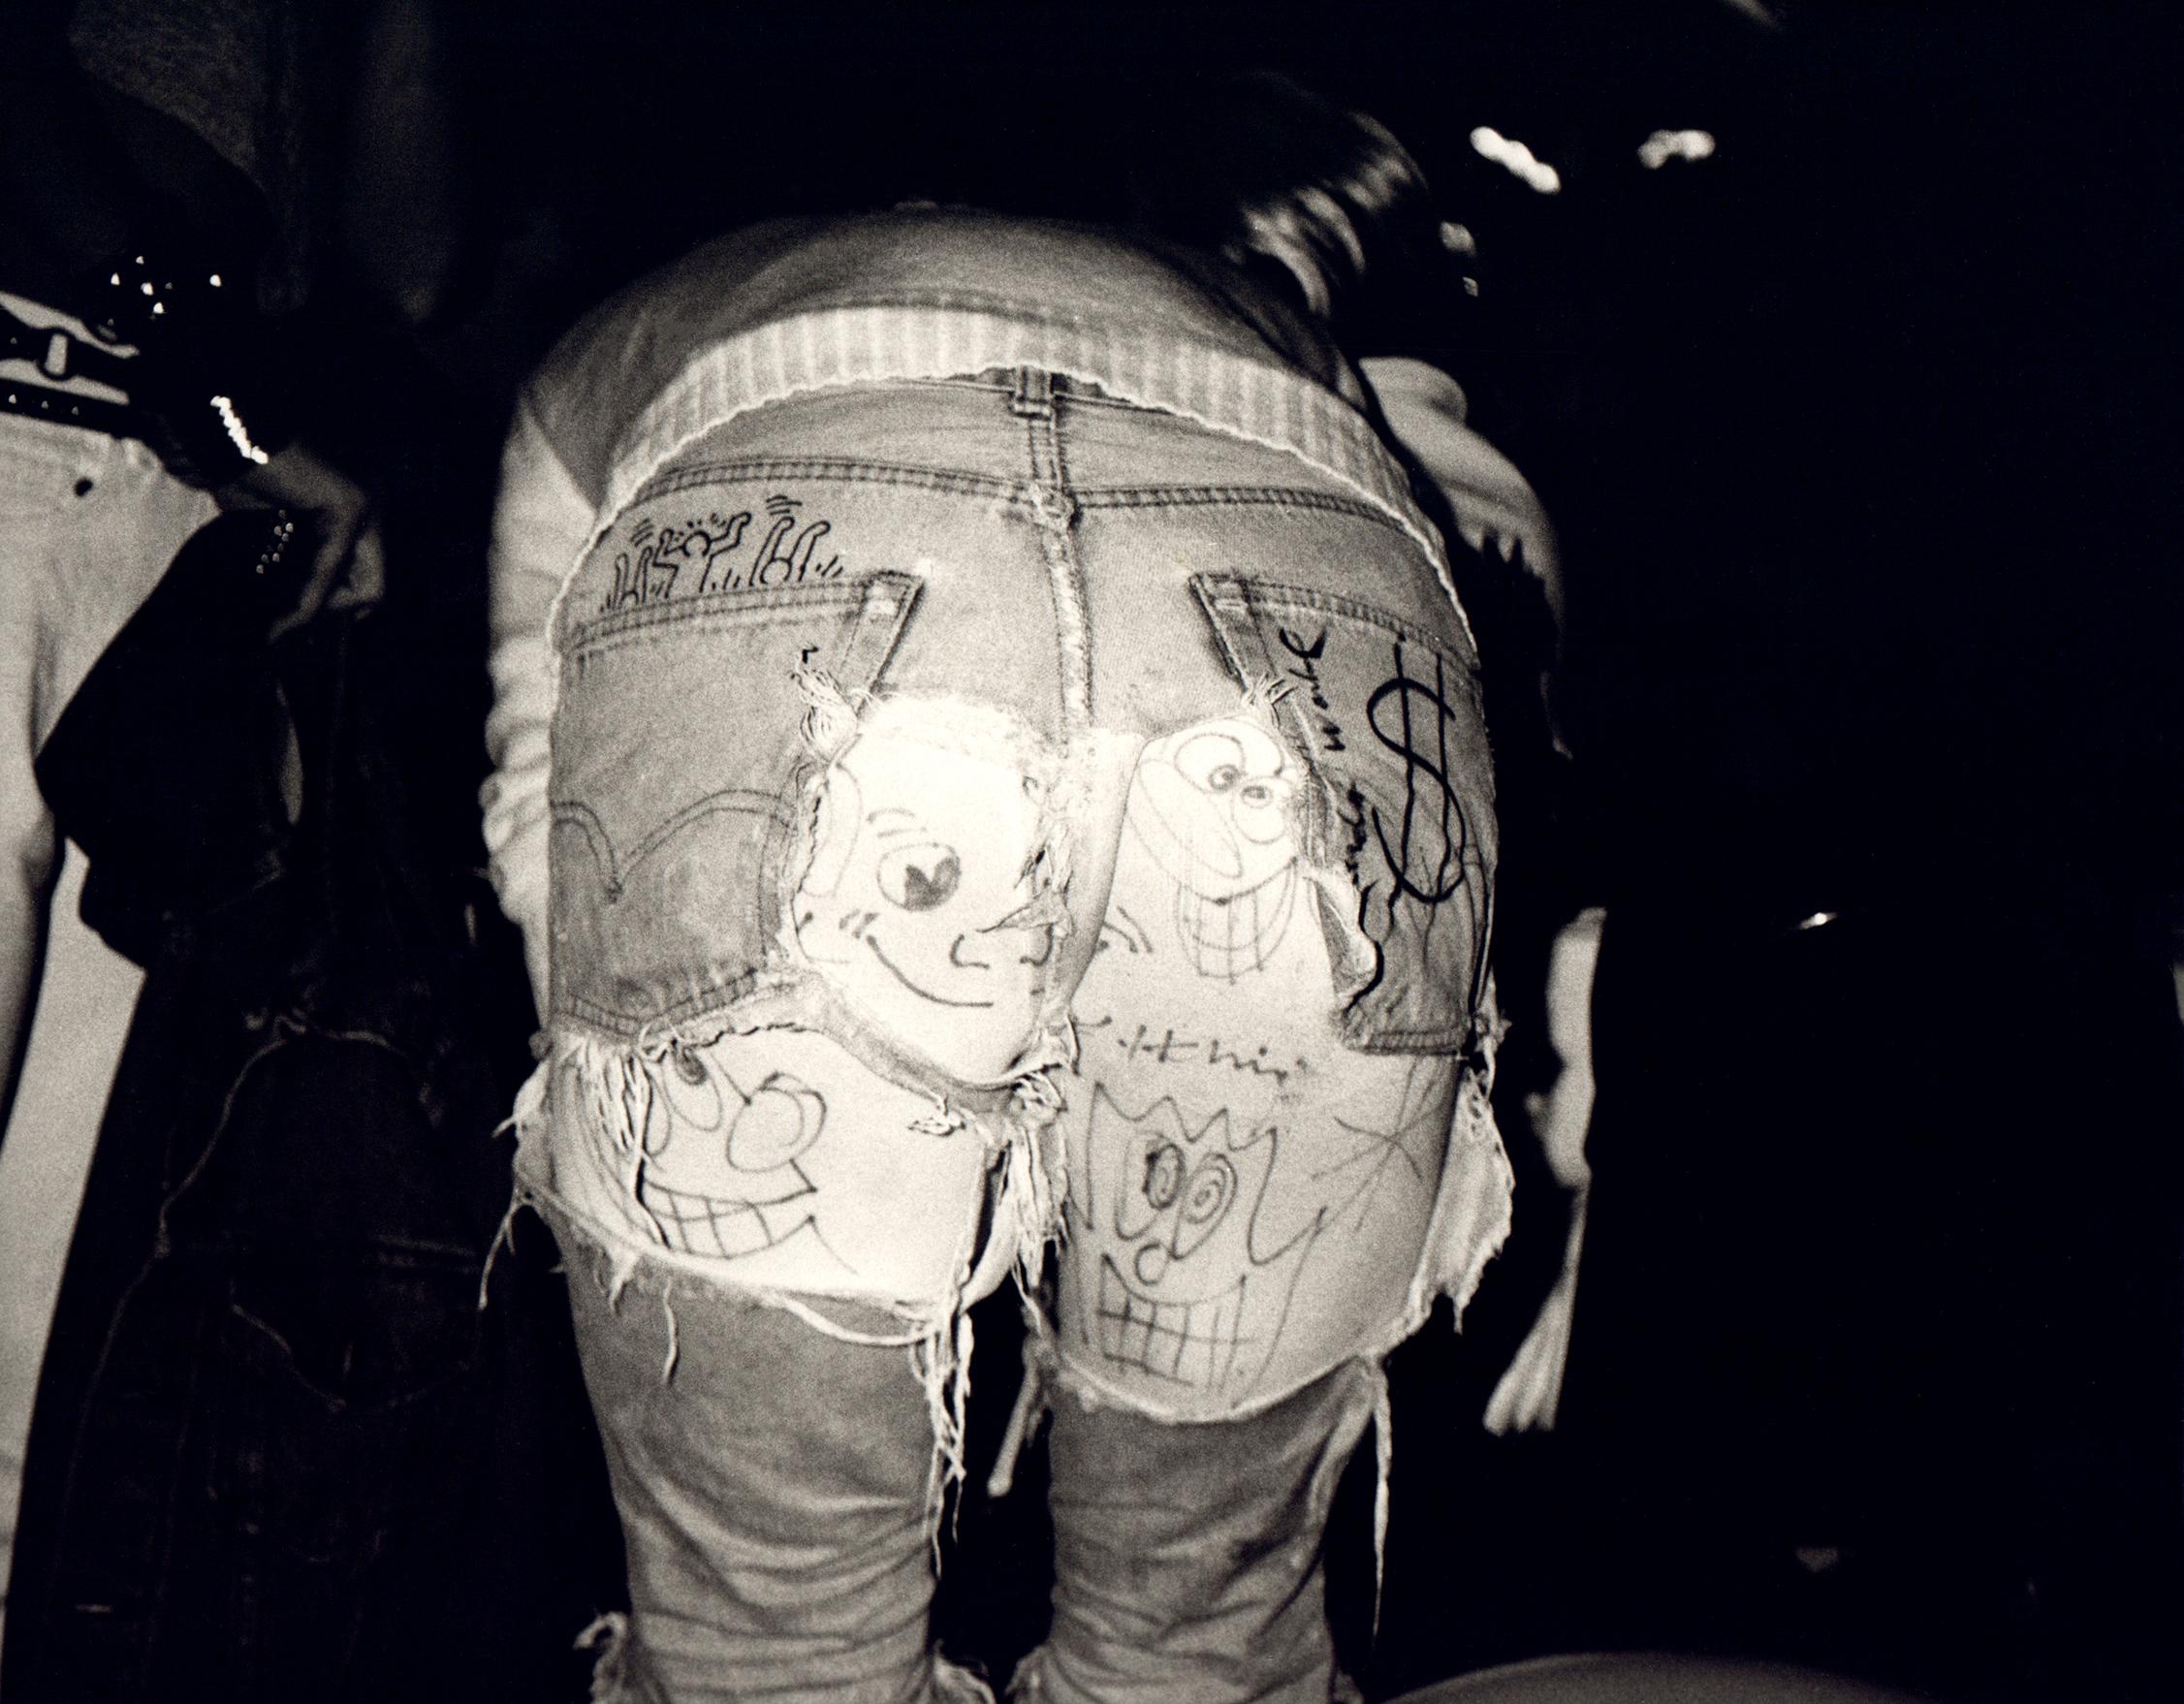 Andy Warhol Black and White Photograph - Photograph of Blue Jeans with designs by Haring, Scharf and Warhol